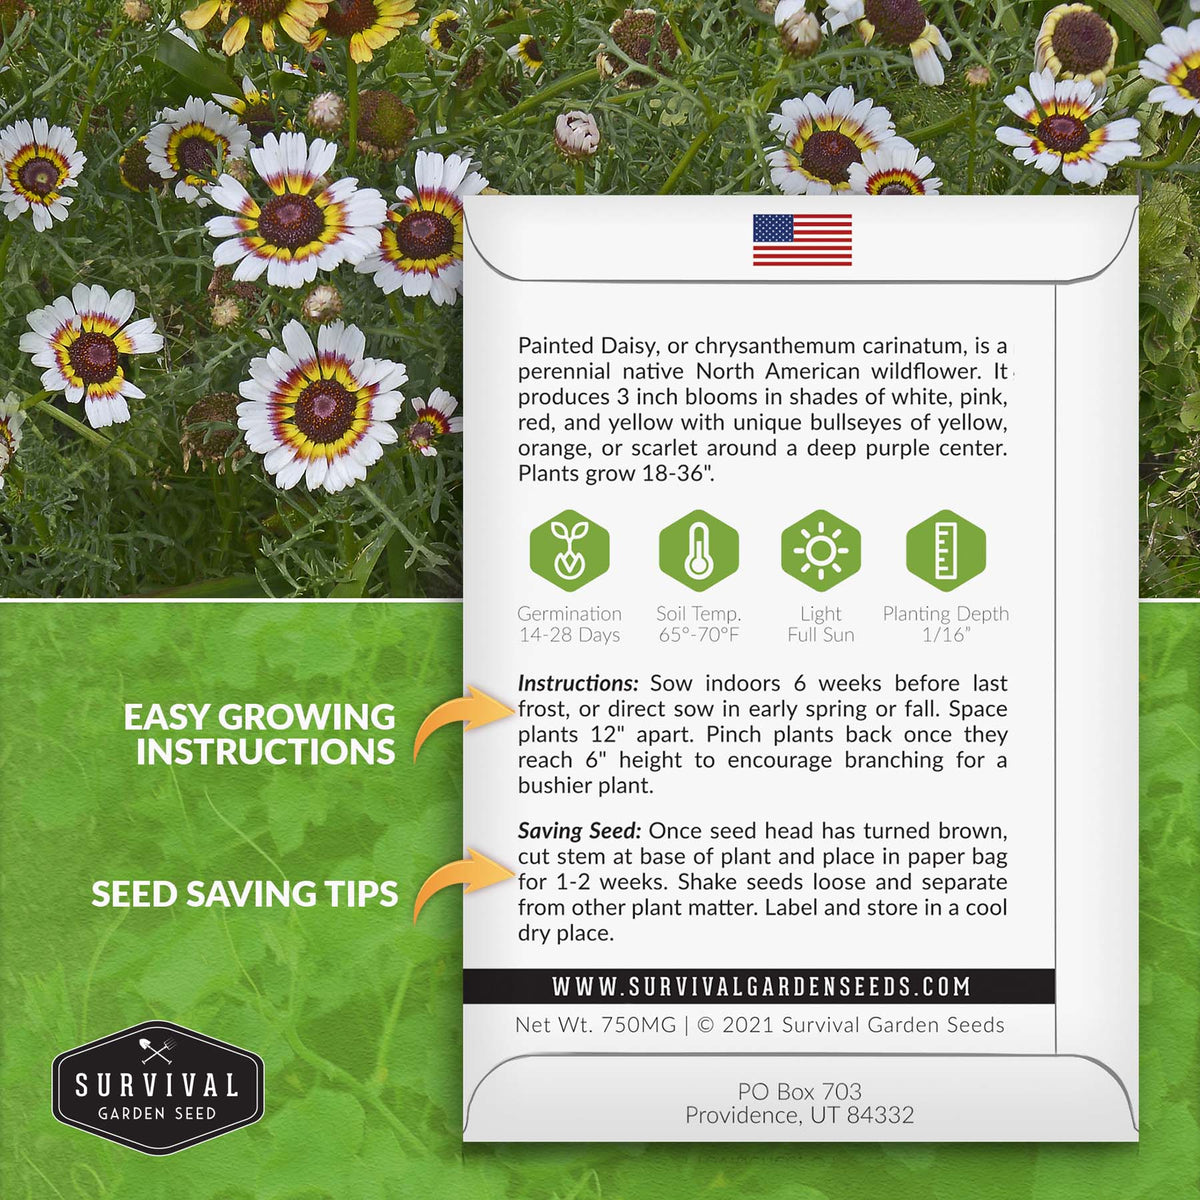 Painted Daisy seed planting instructions